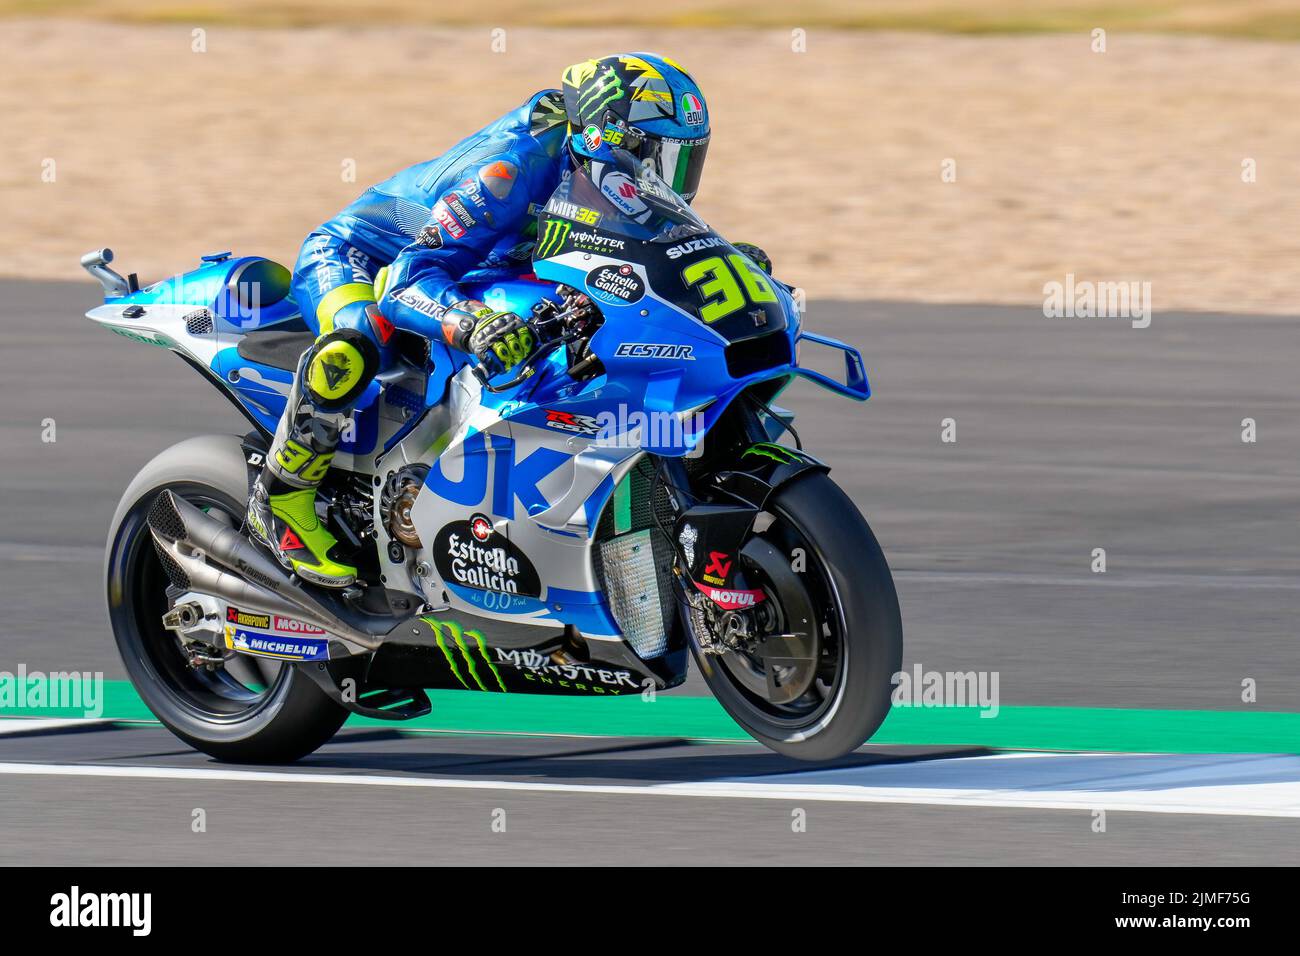 Towcester, UK. 06th Aug, 2022. Joan MIR (Spain) of Team SUZUKI ECSTAR during the 2022 Monster Energy Grand Prix MotoGP Free Practice 3 session at Silverstone Circuit, Towcester, England on the 6th August 2022. Photo by David Horn. Credit: PRiME Media Images/Alamy Live News Stock Photo